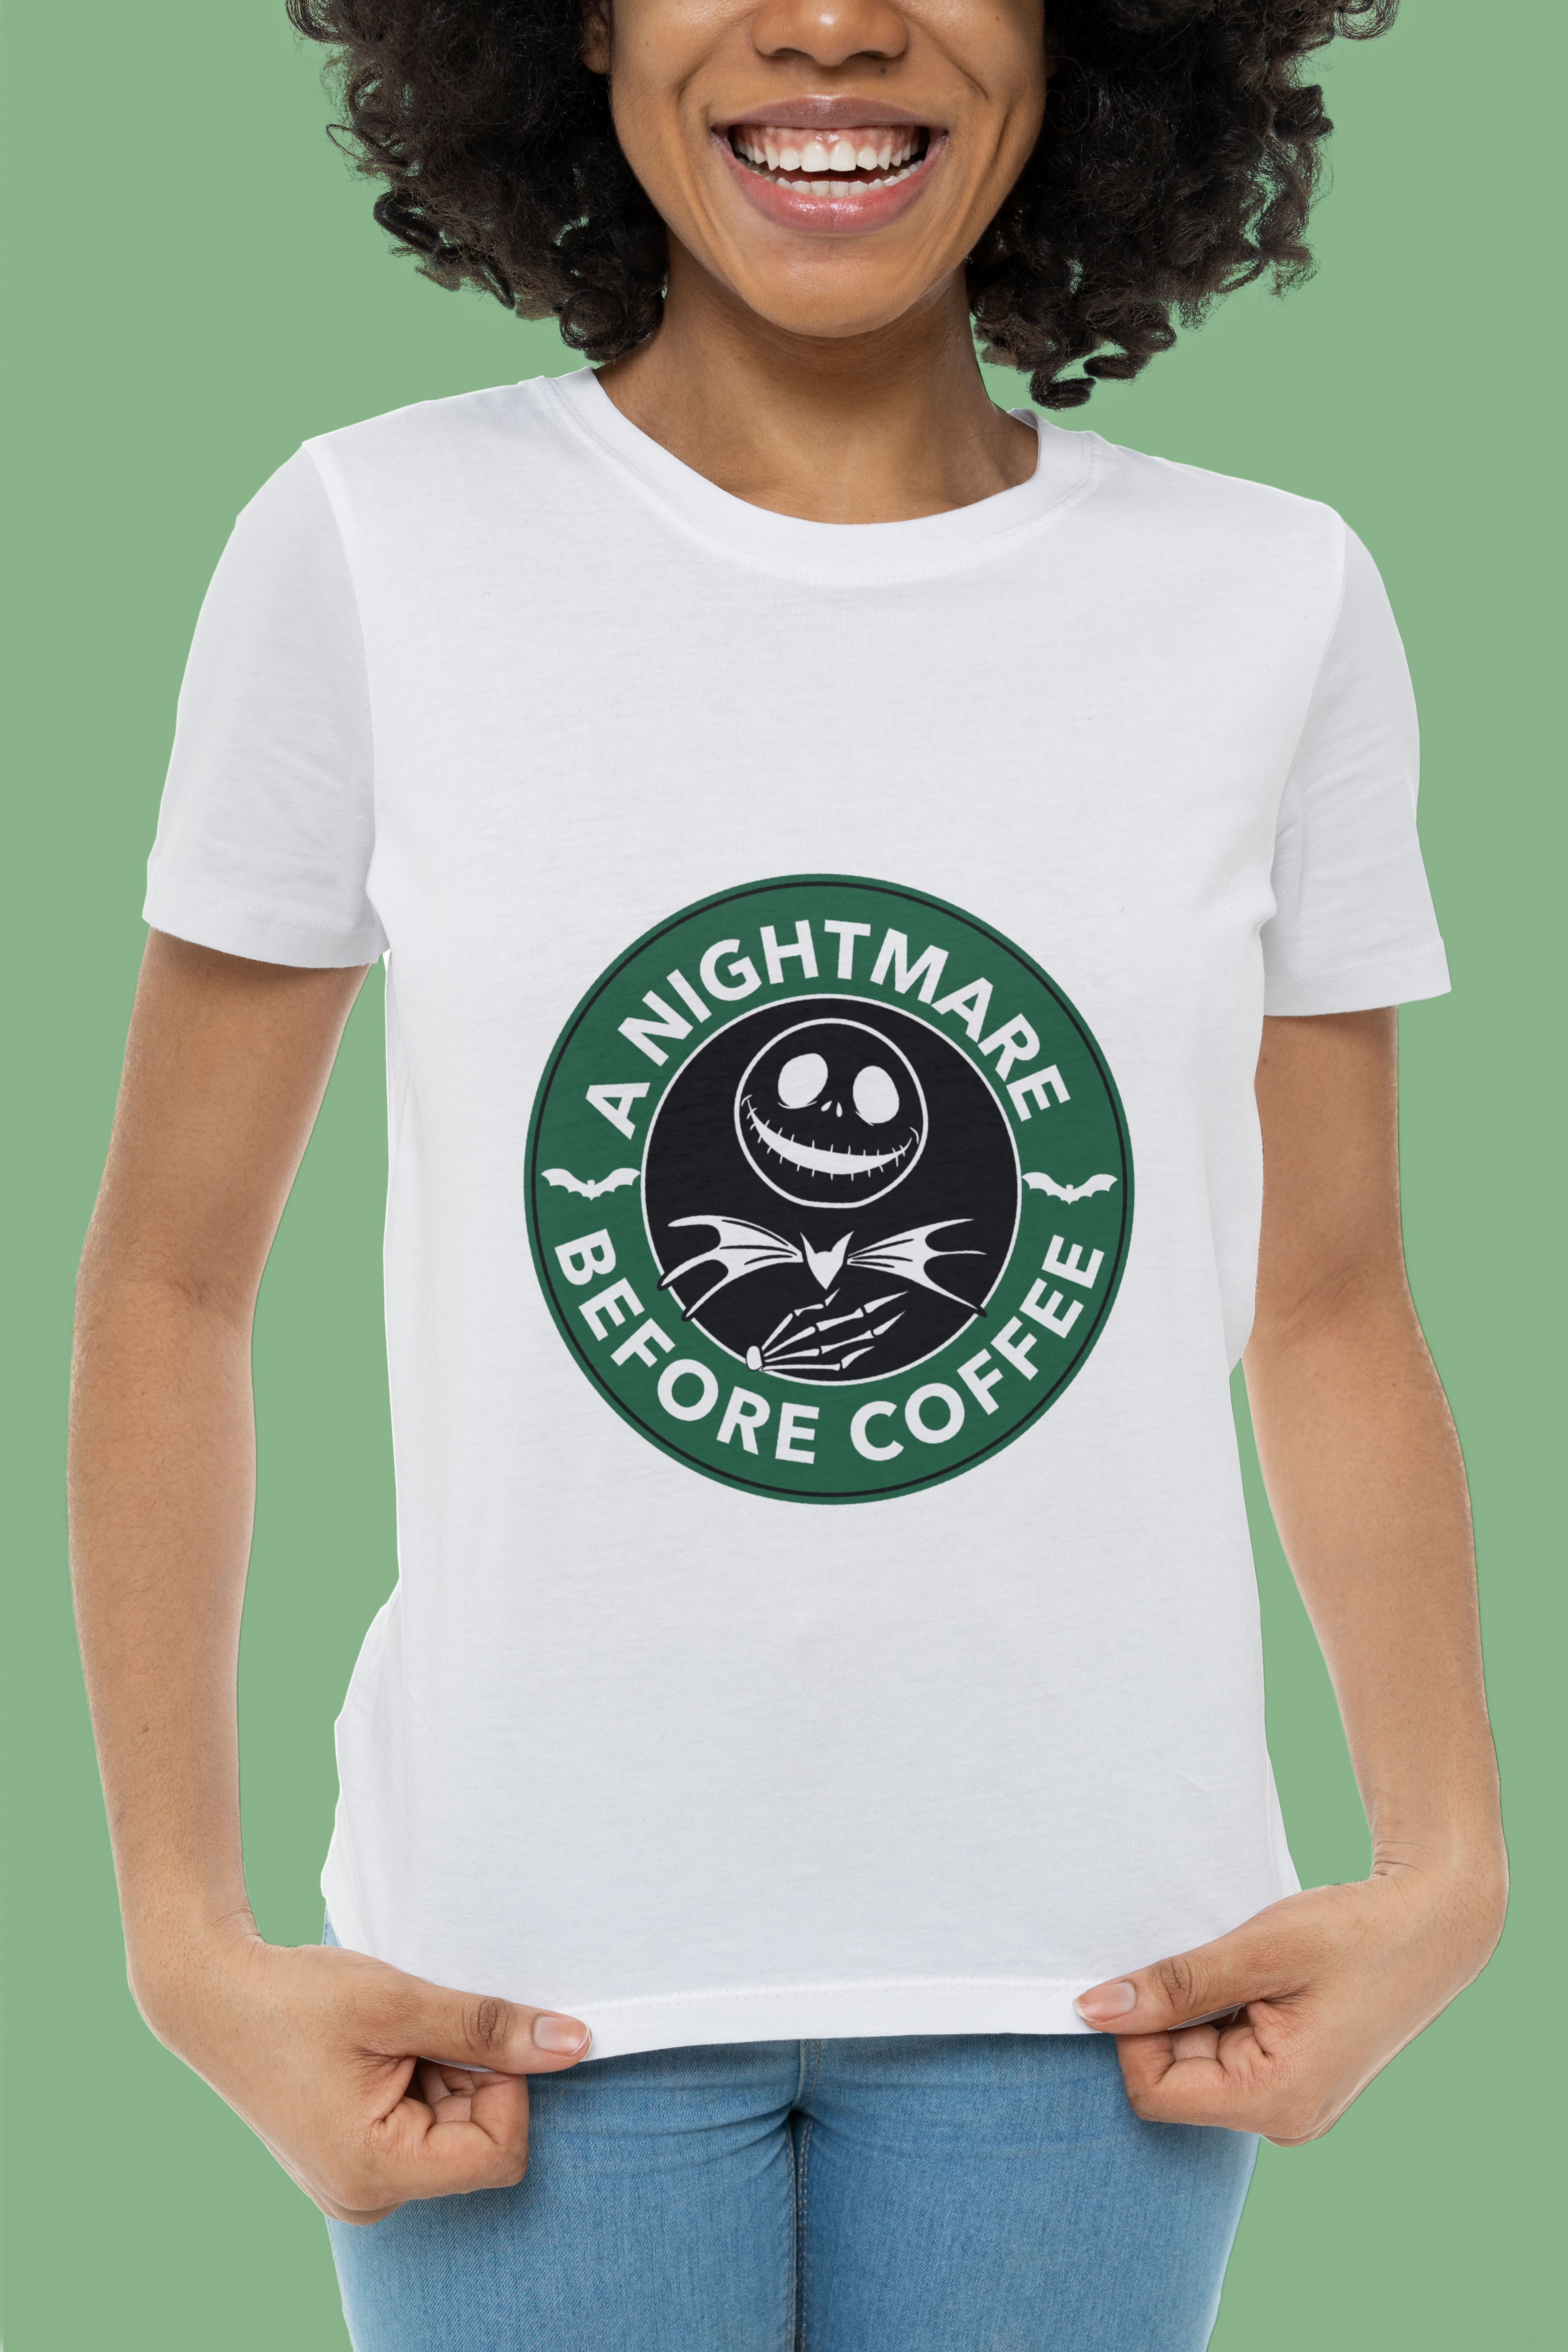 Round illustration with white lettering "A nightmare before coffee" and illustration of a skellington on white t-shirt on a girl.